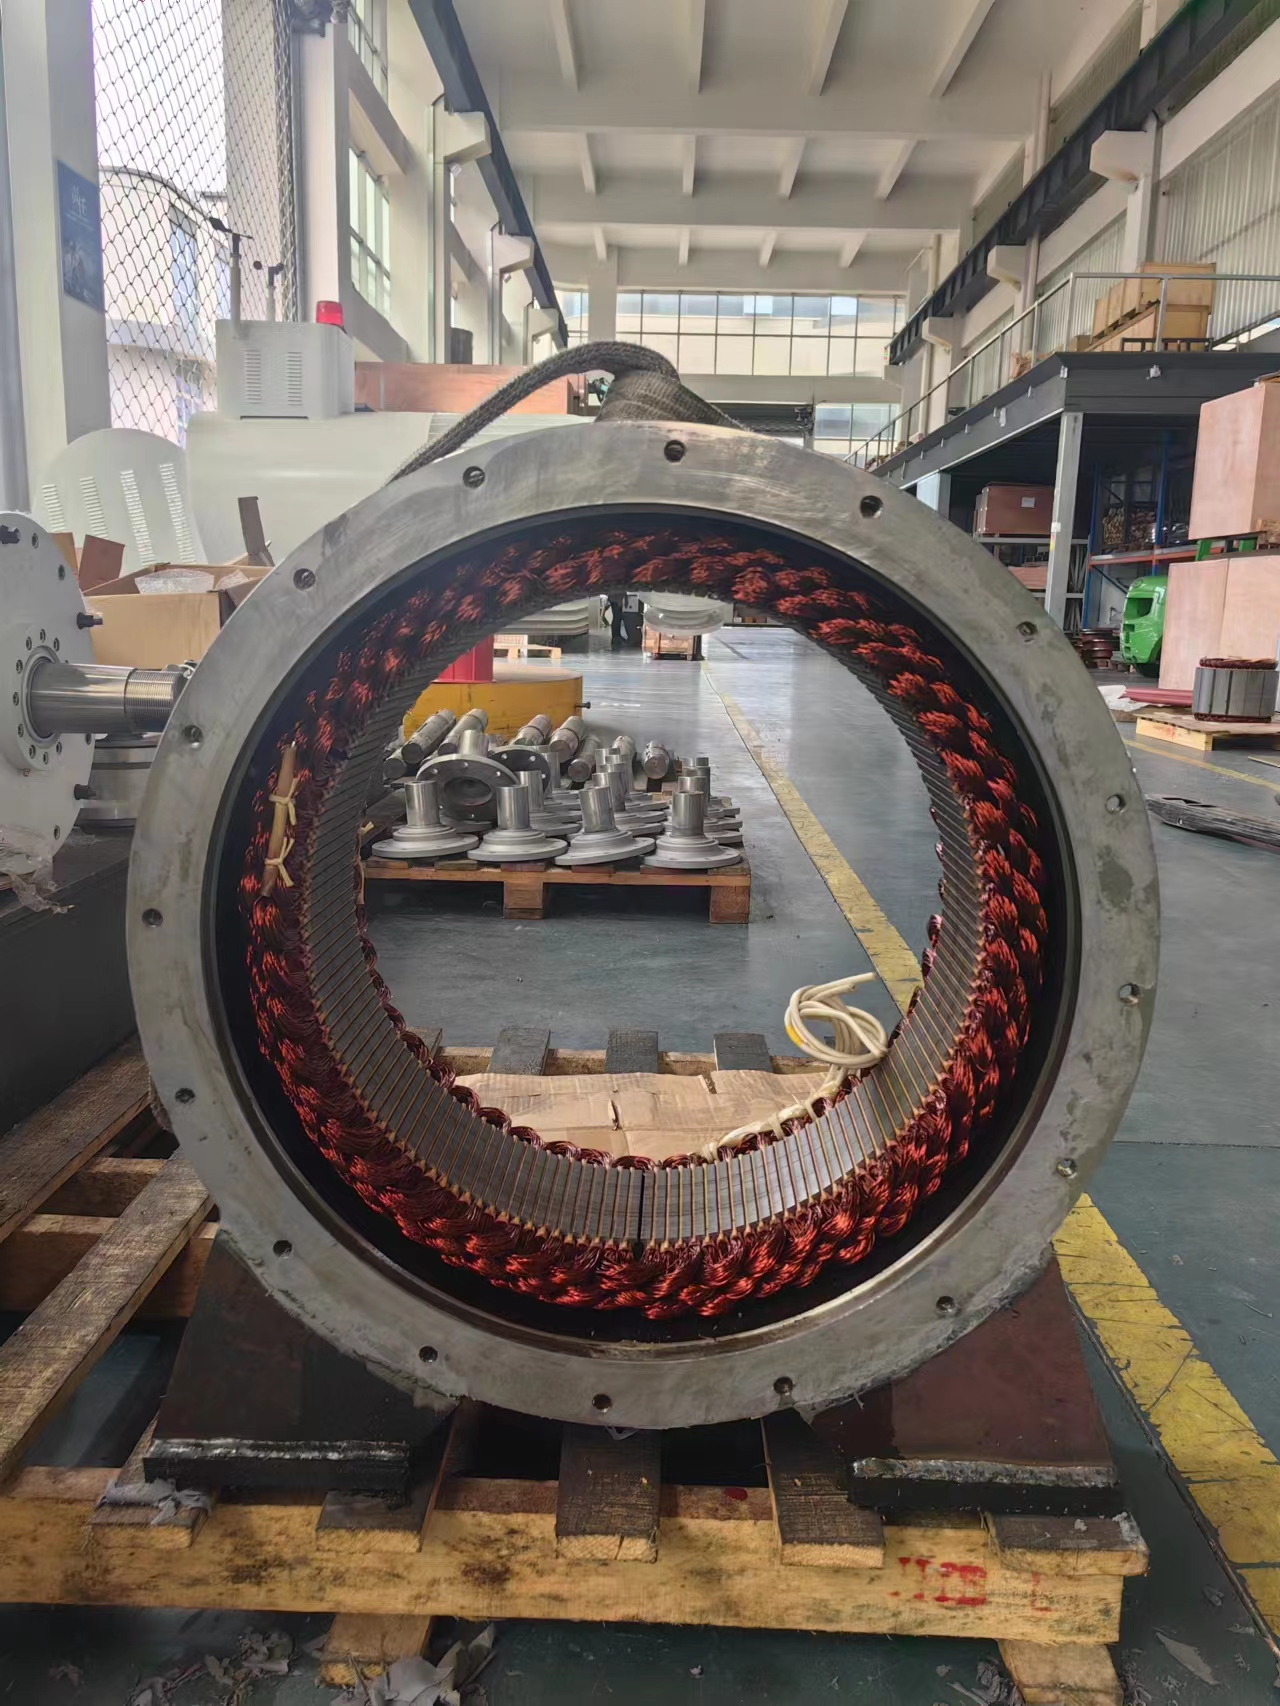 Customized power, speed, voltage, three intersecting water cooled liquid cooled direct drive maintenance free hydraulic wind permanent magnet generator